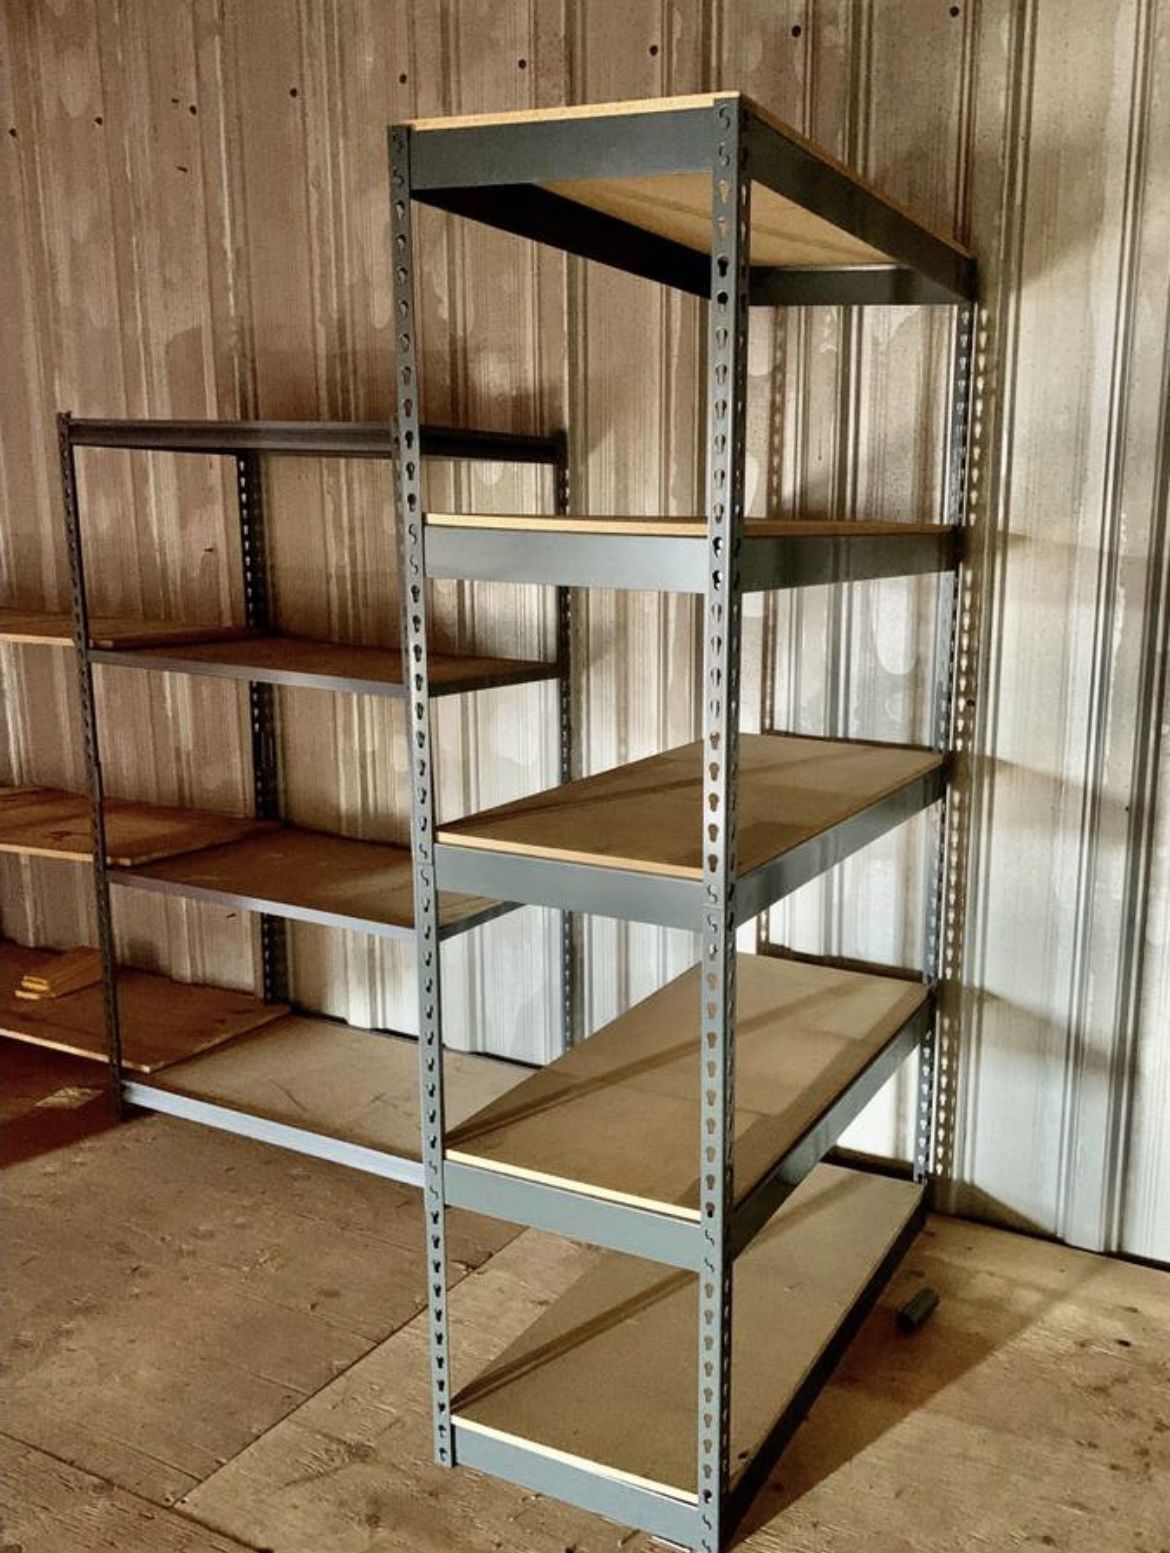 Garage Shelving 48 in W x 18 in D New Industrial Racks Great For Home Office And Commercial Storage Delivery & Assembly Available